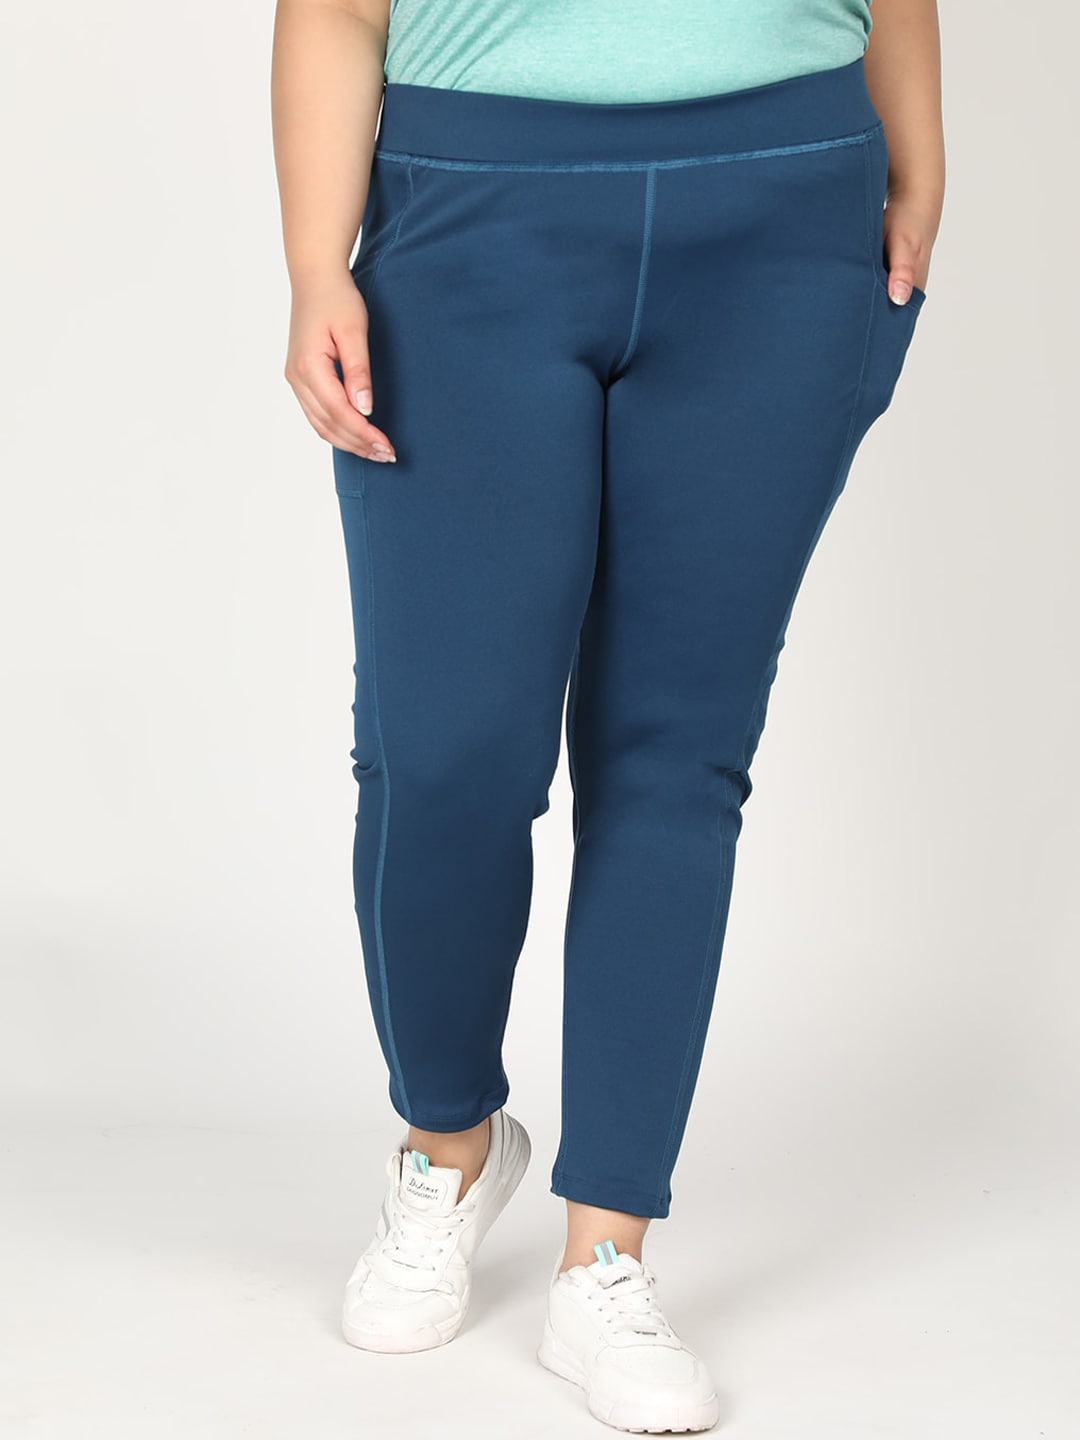 CHKOKKO Plus Women Blue Solid Skinny-Fit Tights Price in India